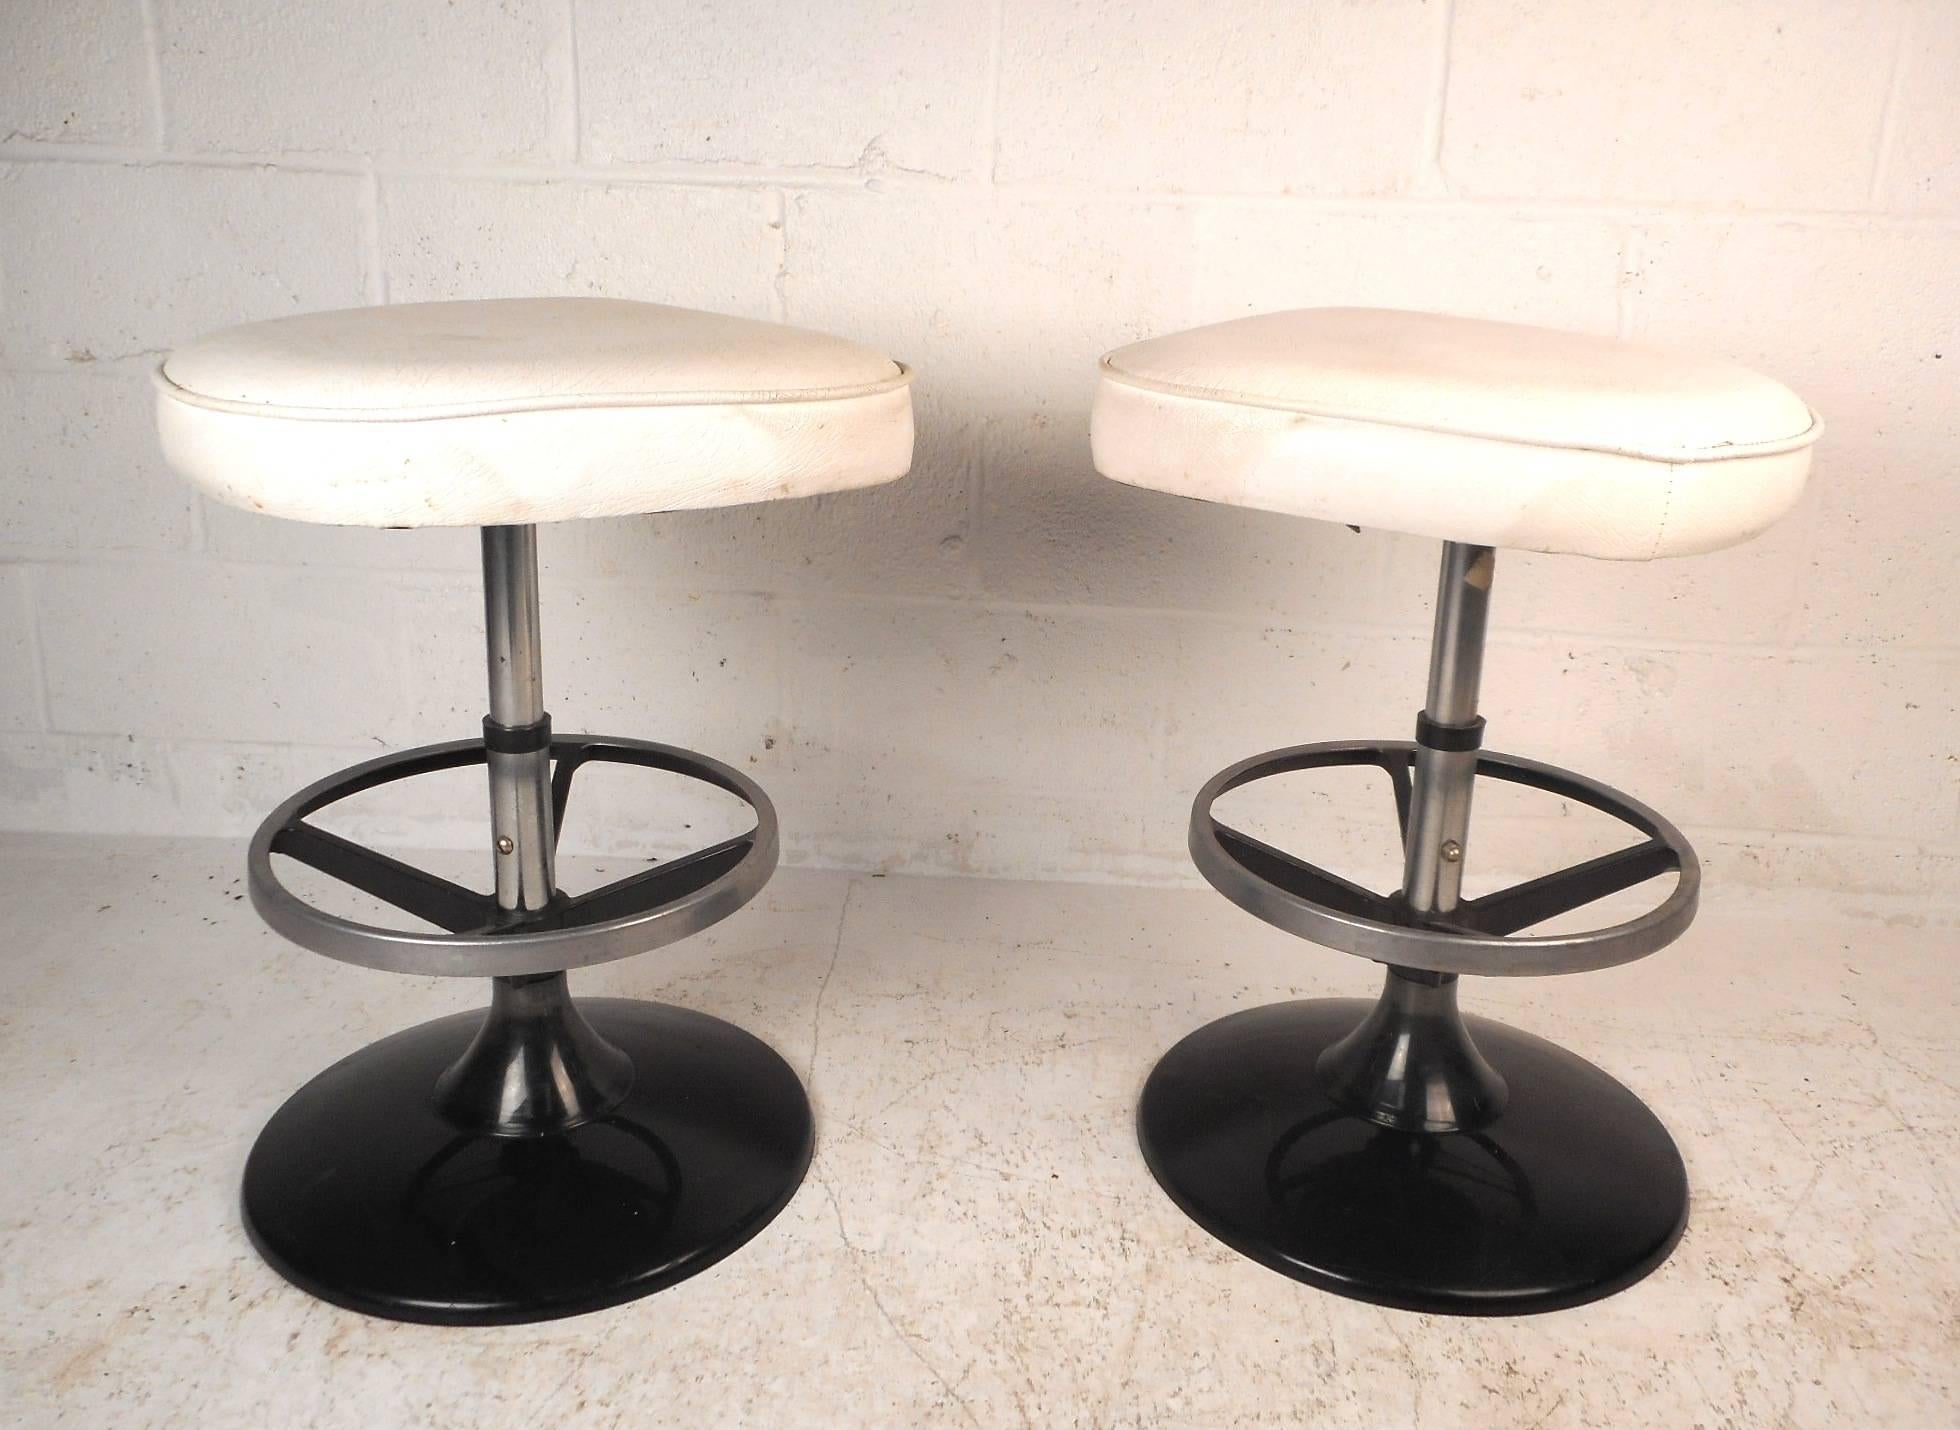 This beautiful pair of vintage modern swivel bar stools feature thick padded seats covered in white vinyl. Sleek design with a black metal base and a convenient circular foot rest. This comfortable pair of mid-century stools make the perfect